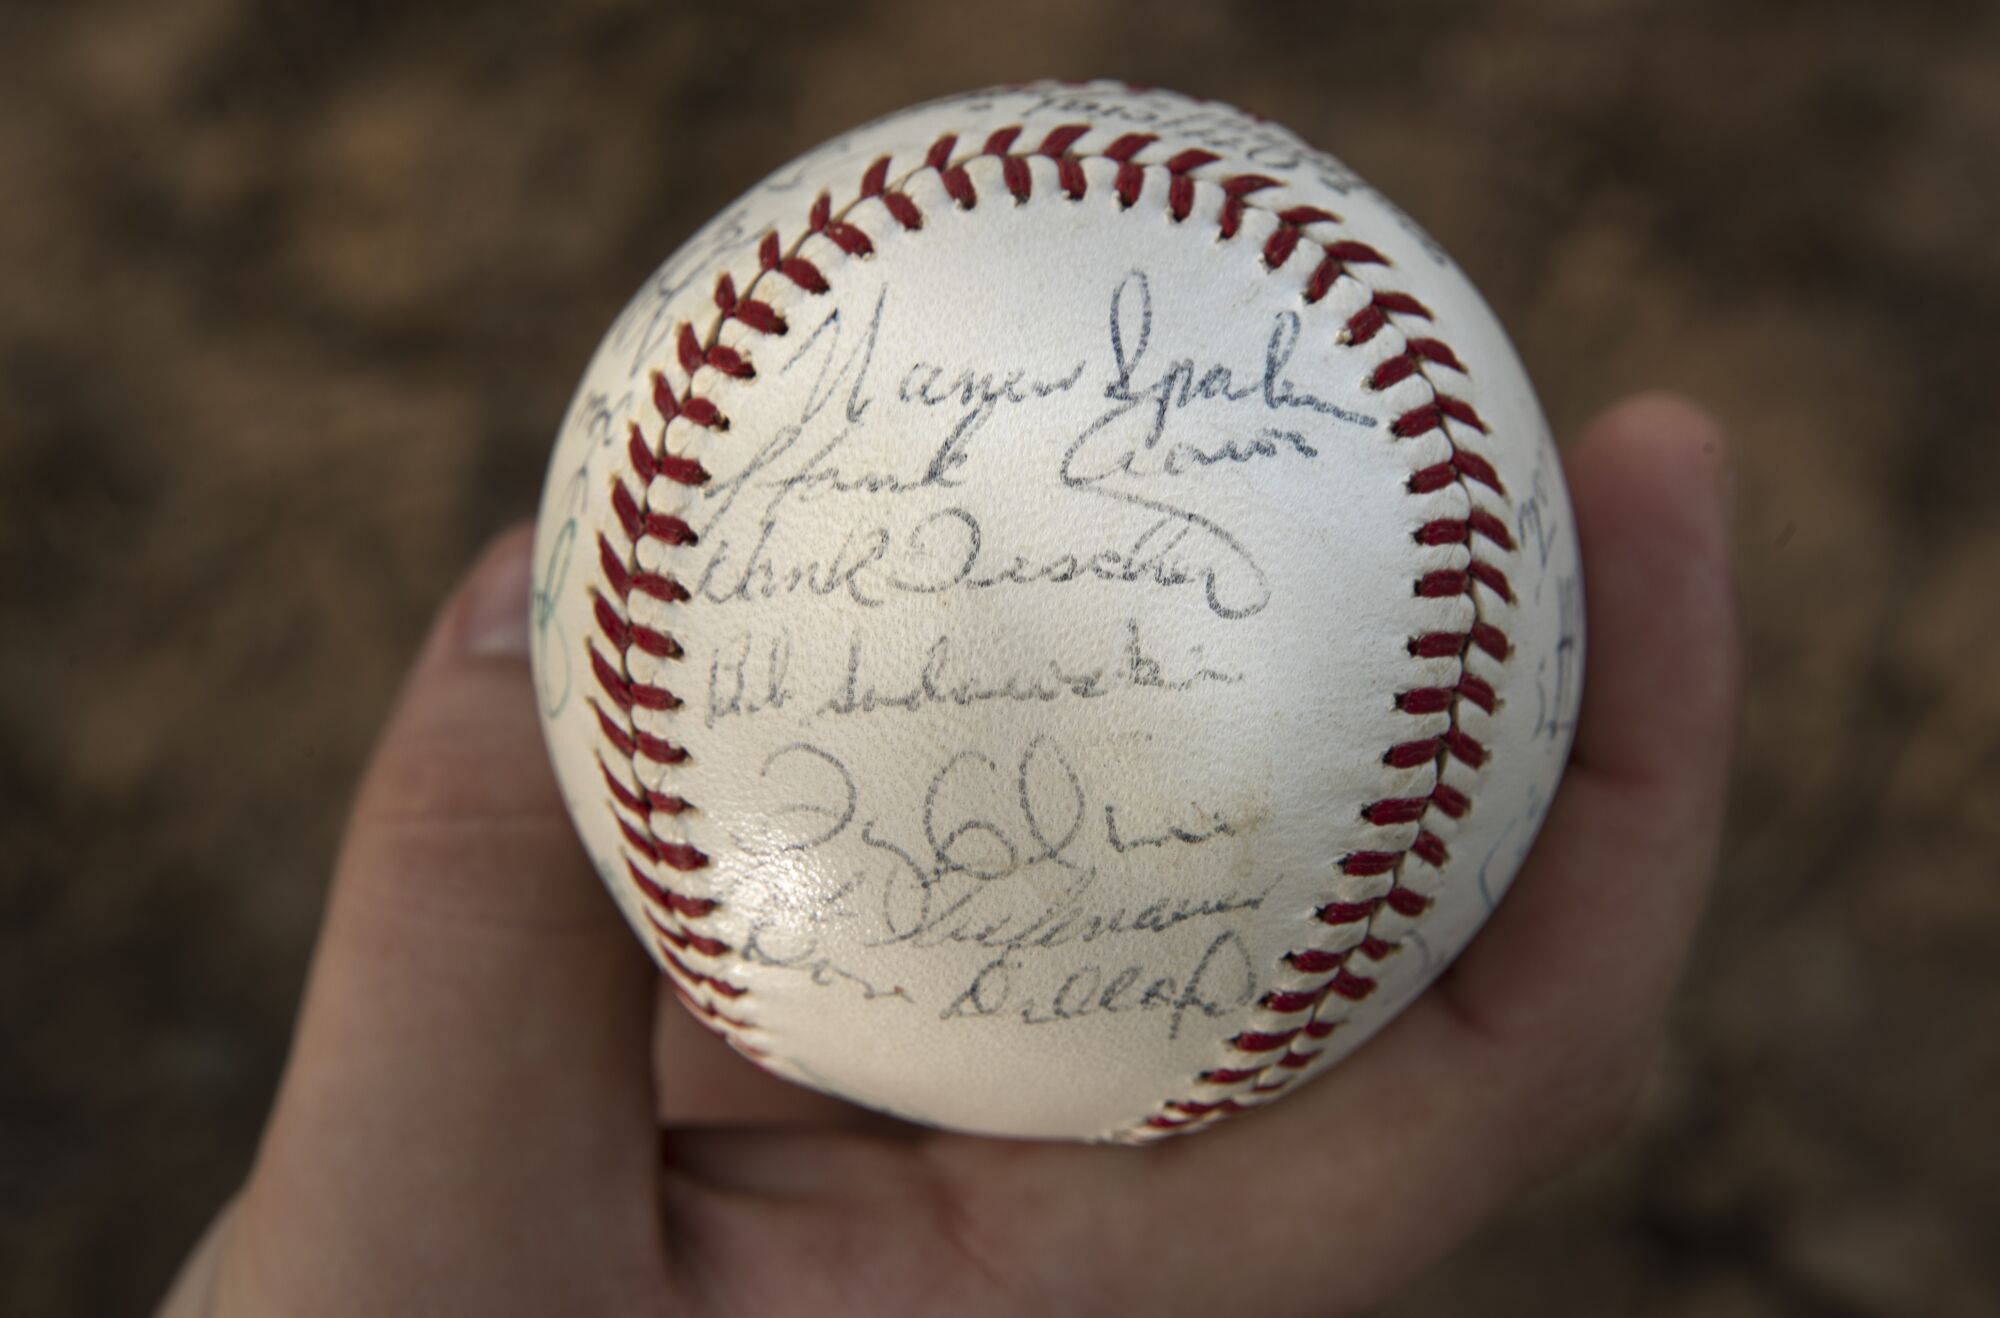 The ball signed by the 1963 Milwaukee Braves. The top two signatures are Warren Spahn and Hank Aaron.